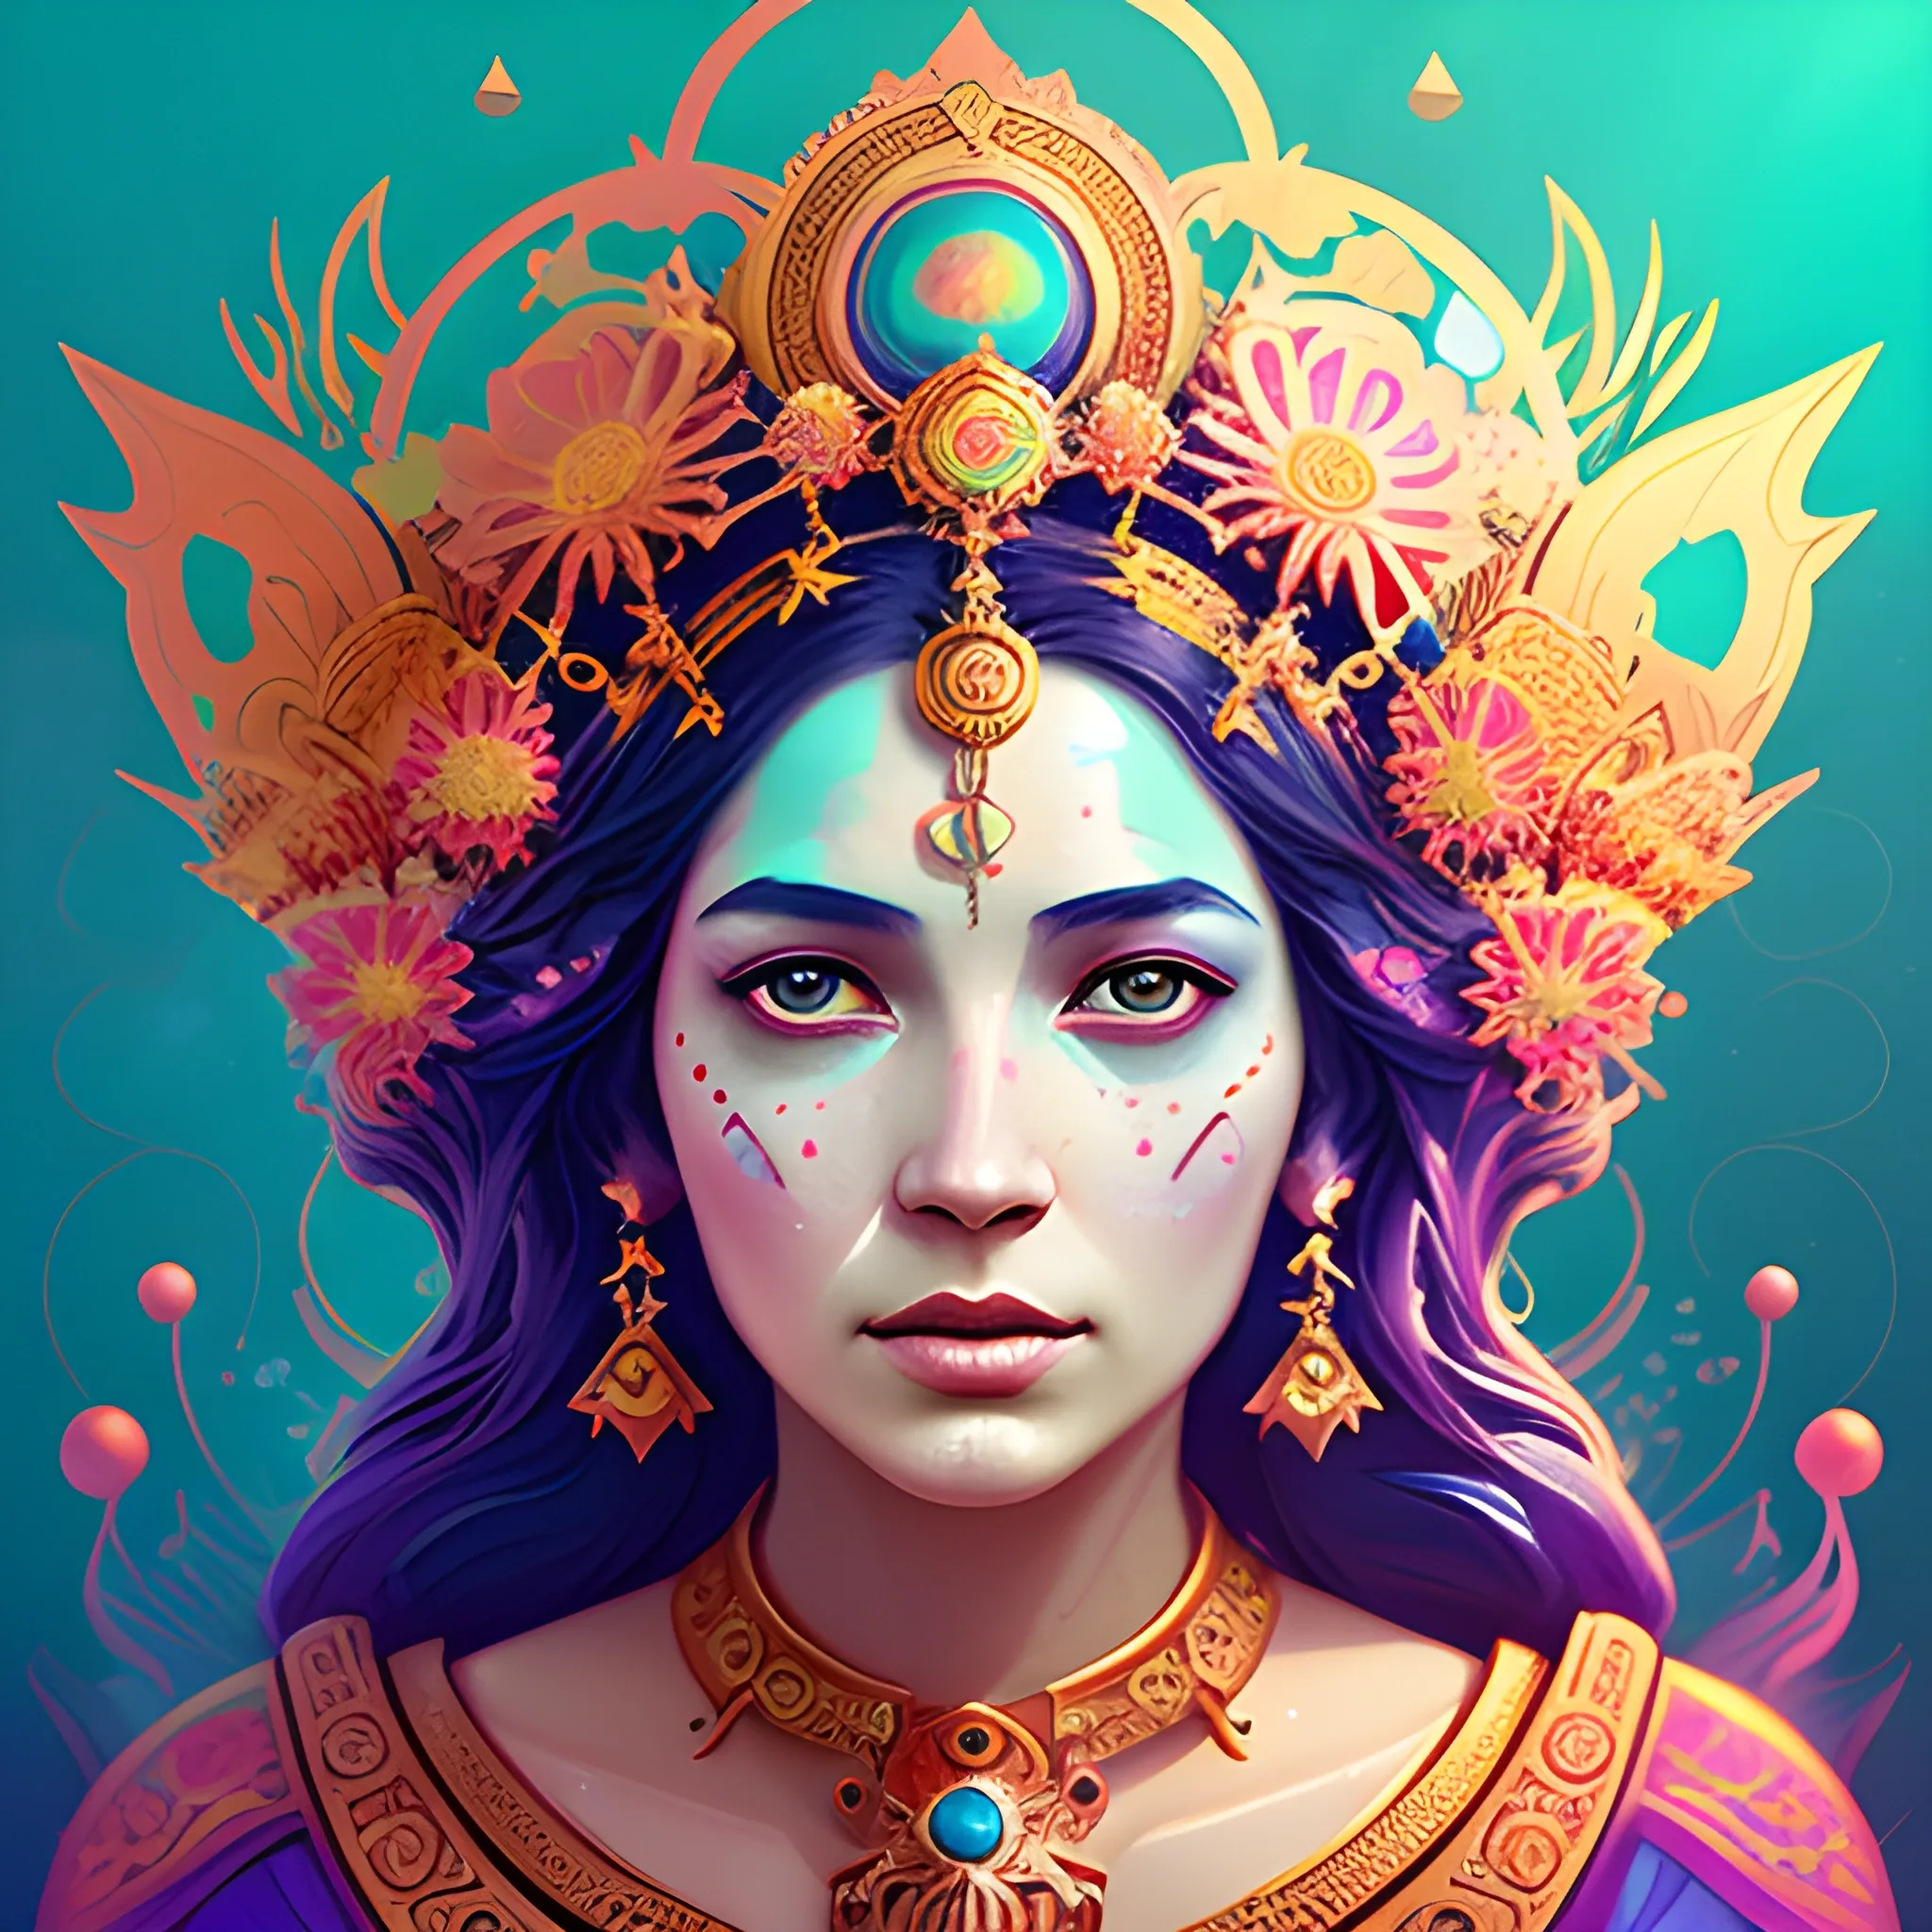 Flowery beautiful face empress or priestess with gold jewellery, by petros afshar, ross tran, Tom Bagshaw, tom whalen, underwater bubbly psychedelic clouds, Anaglyph 3D lens blur effect